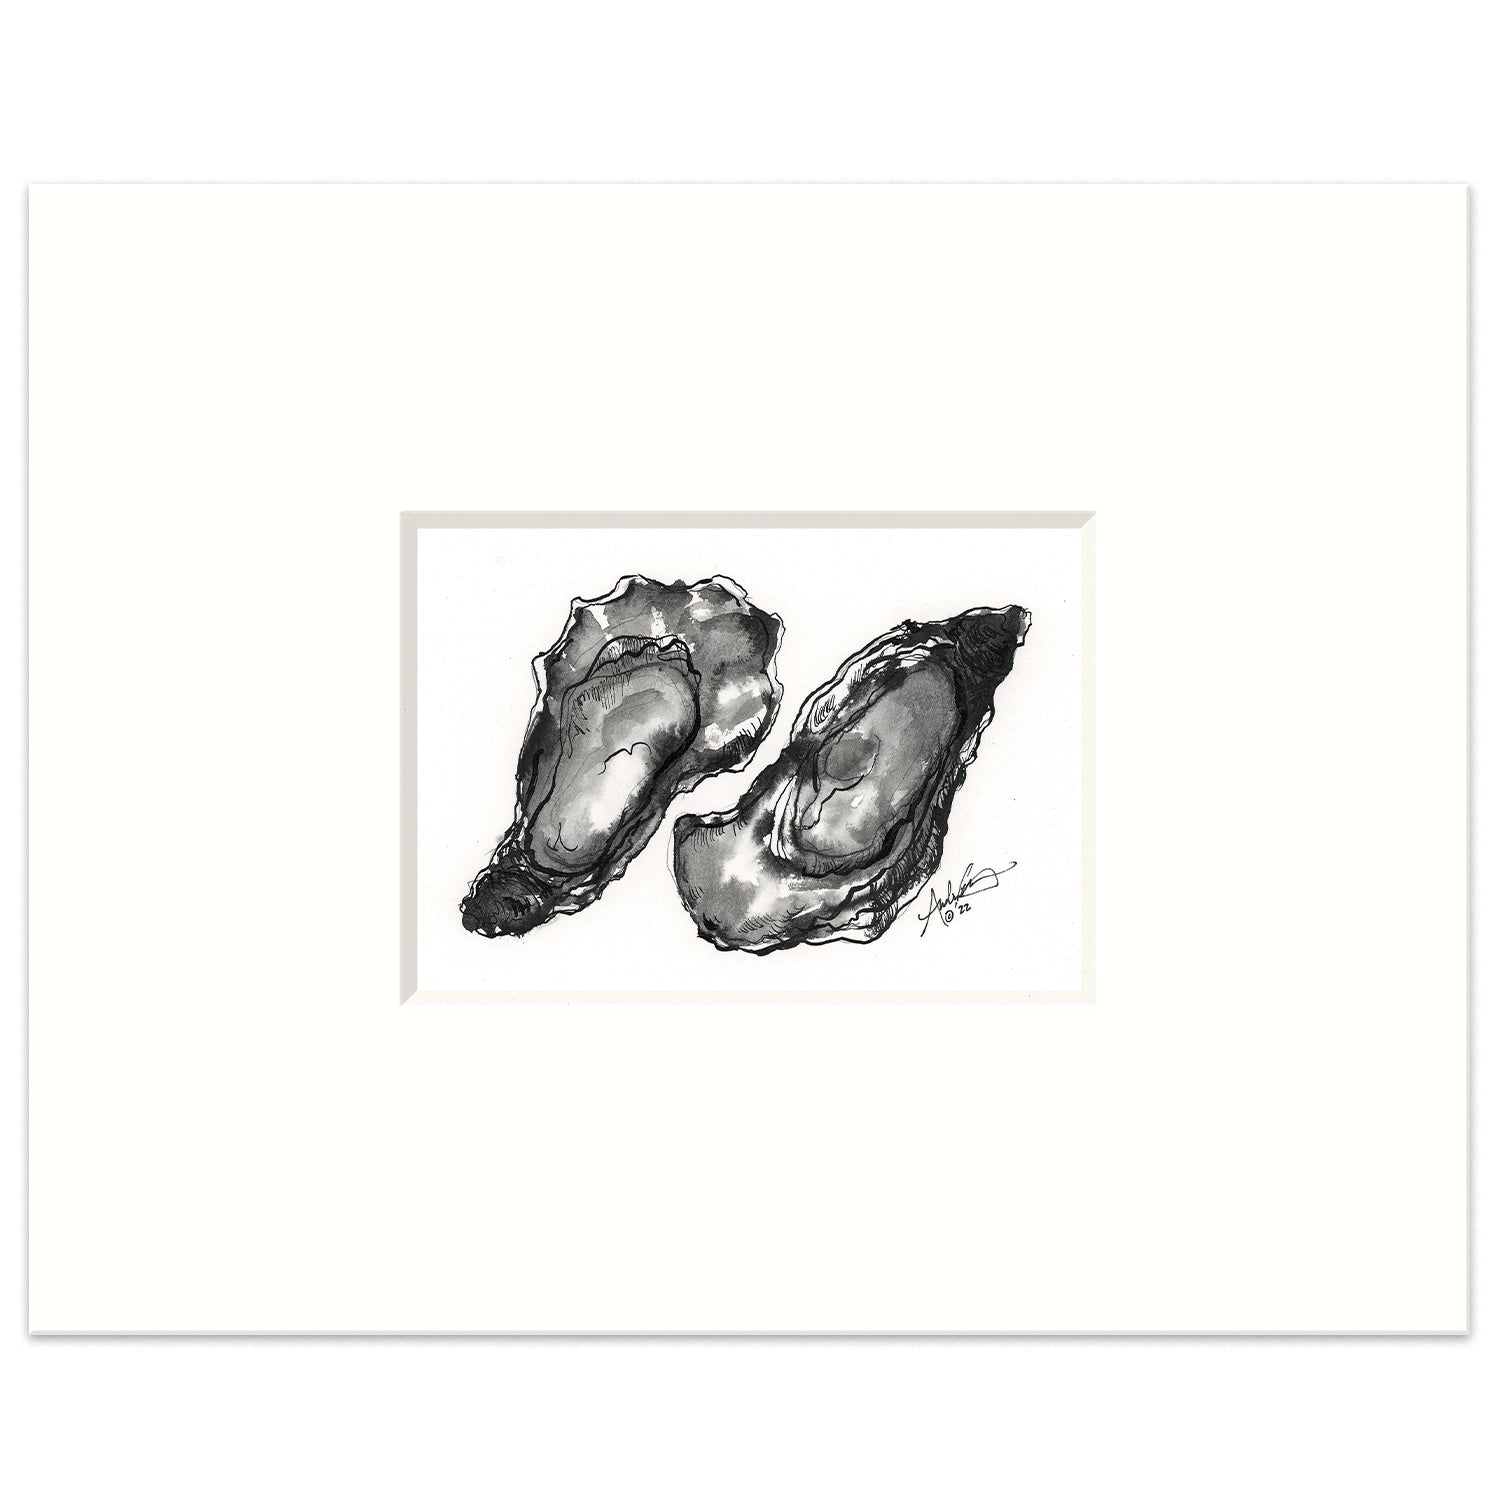 Pair of Oysters 2, 5x7” Original